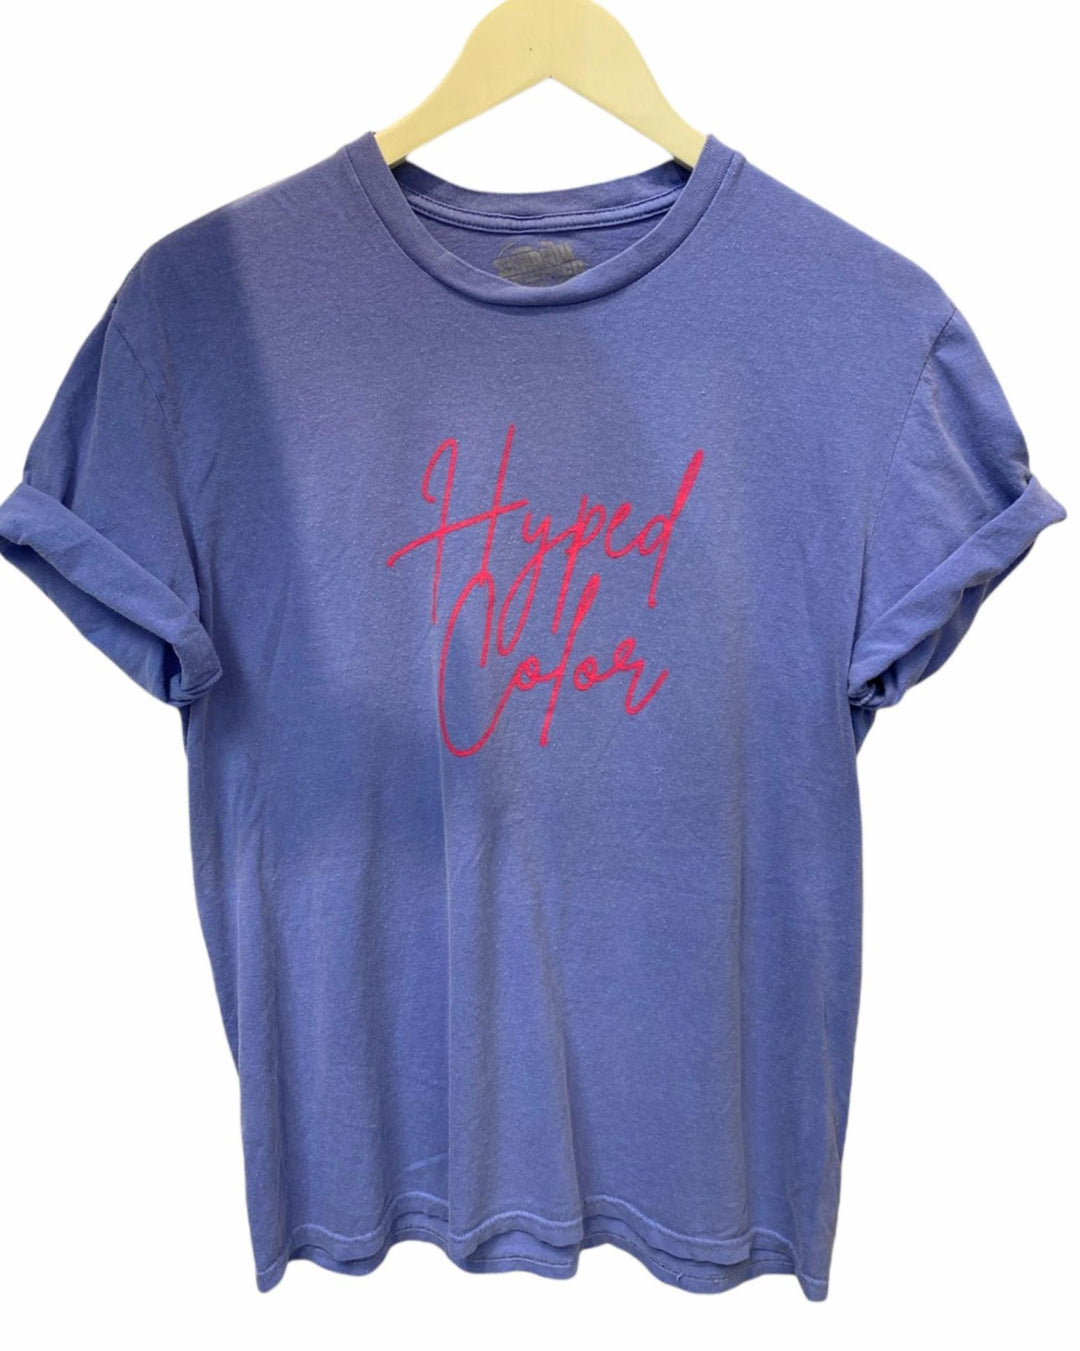 Blue Hyped Color Graphic Tee